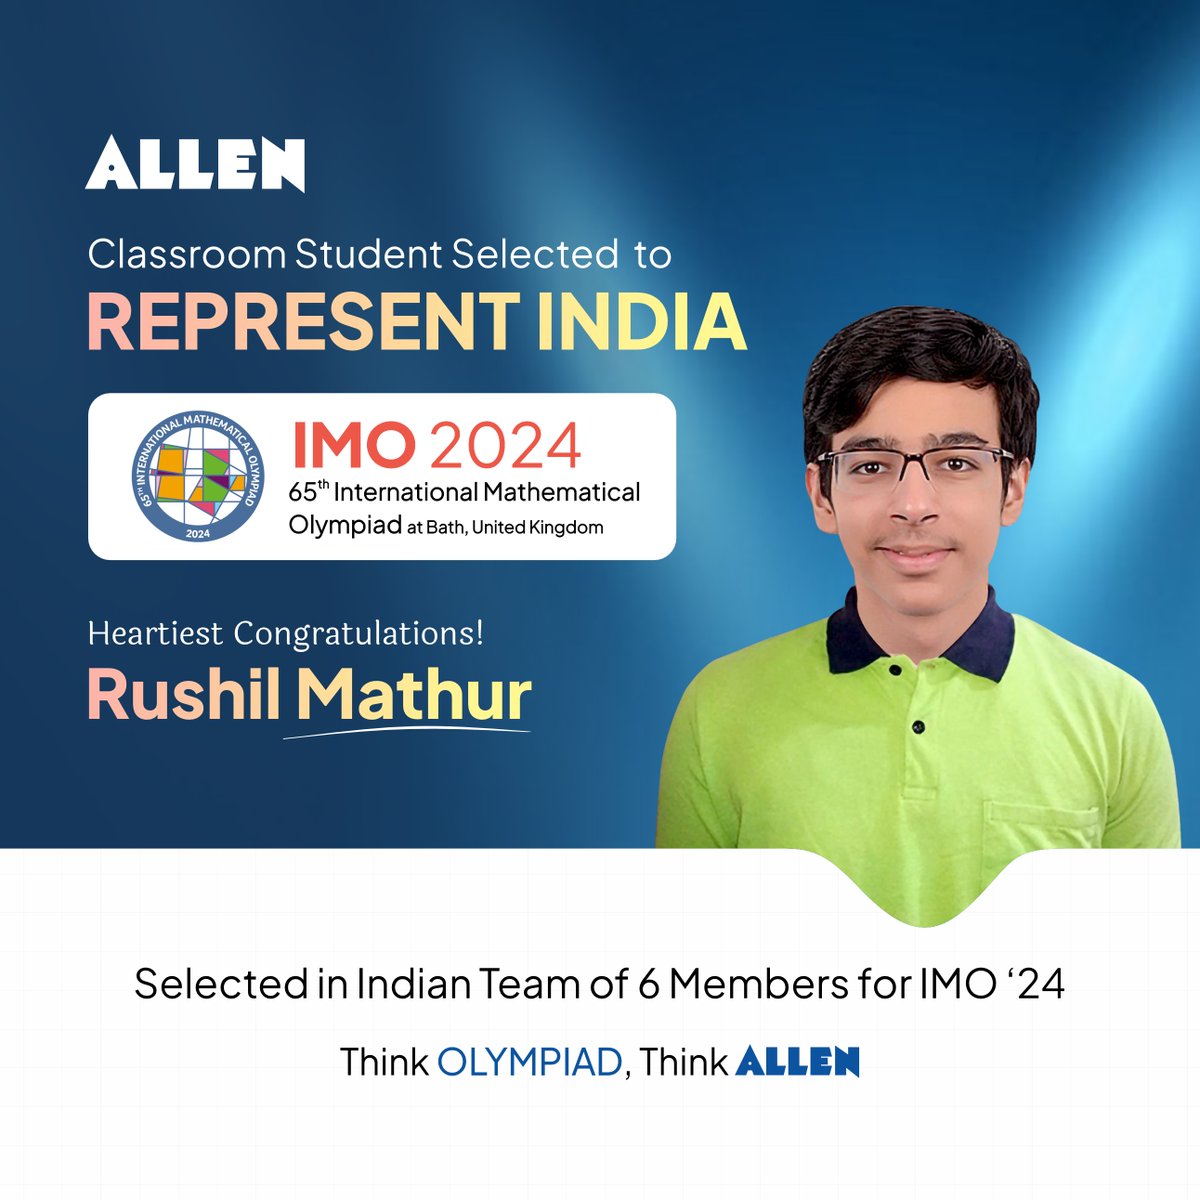 ⭐ Meet ALLEN Classroom Student Rushil Mathur, the Maths Maestro who has been selected in the Indian team of 6 members for the International Mathematical Olympiad at Bath, United Kingdom!

🎊 Congratulations for the next stage!

#ALLEN #IMO2024 #OlympiadResult #KotaCoaching